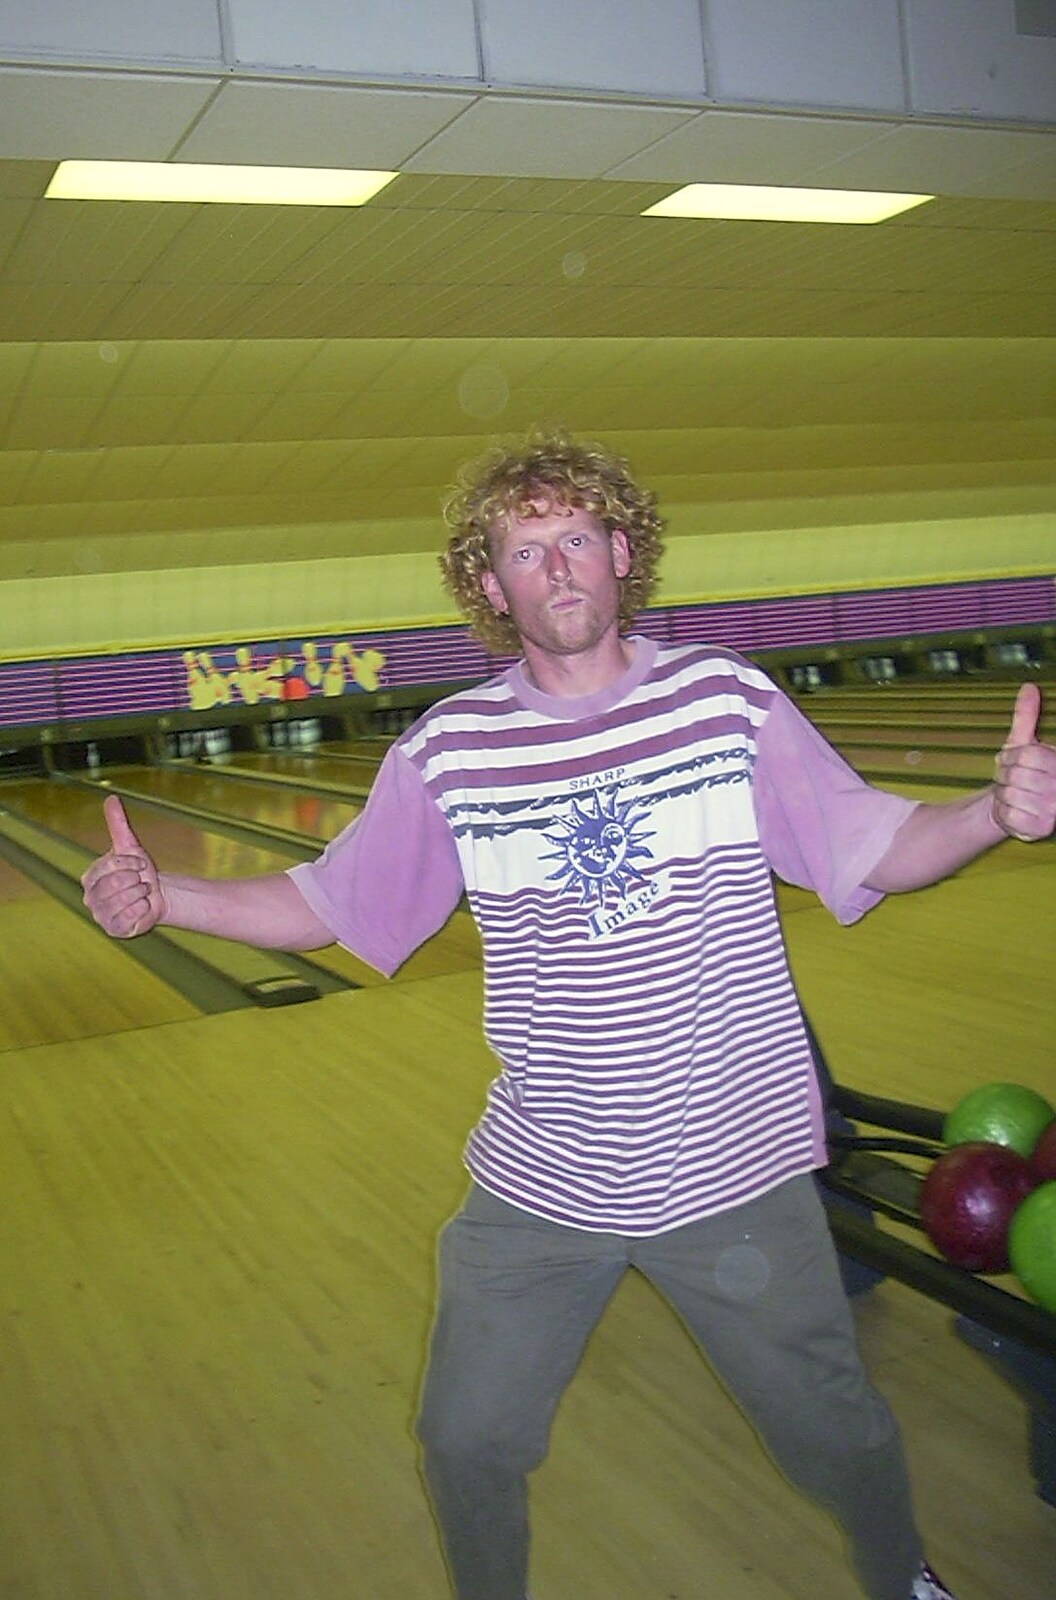 Wavy gives it the thumbs up from Ten Pin Bowling, Norwich, Norfolk - 13th September 2003